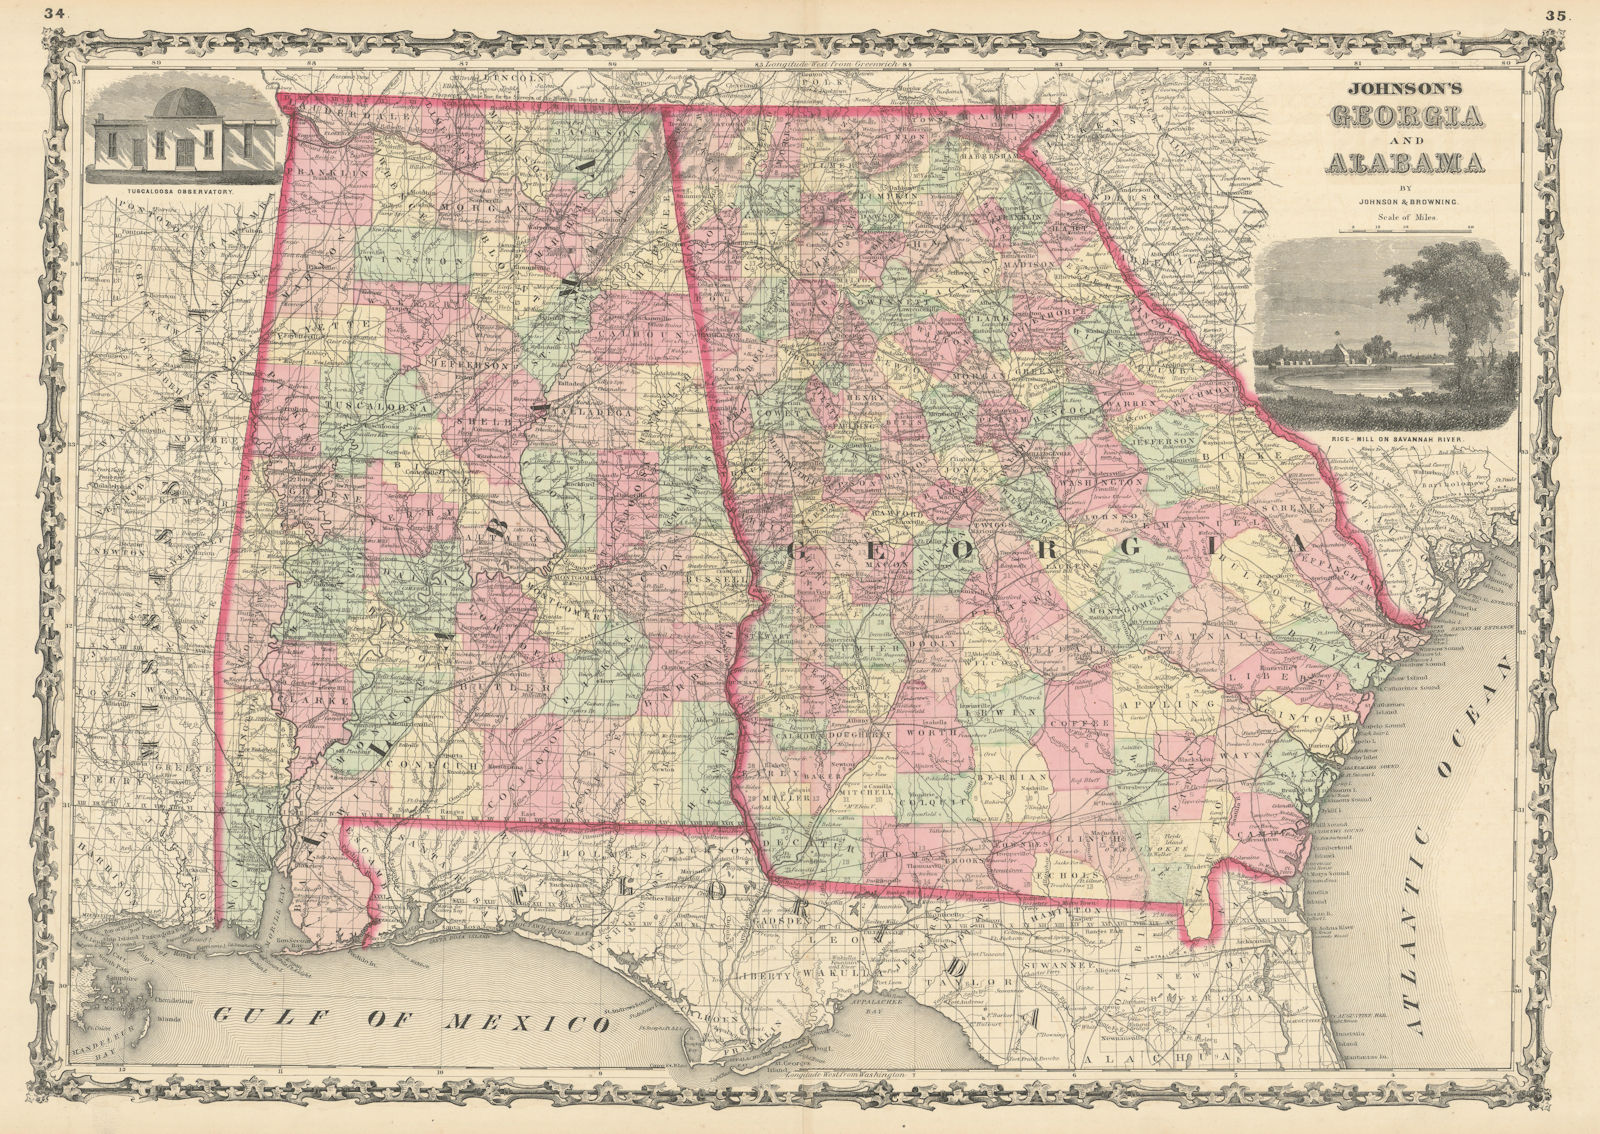 Johnson's Georgia & Alabama. US state map showing counties 1861 old